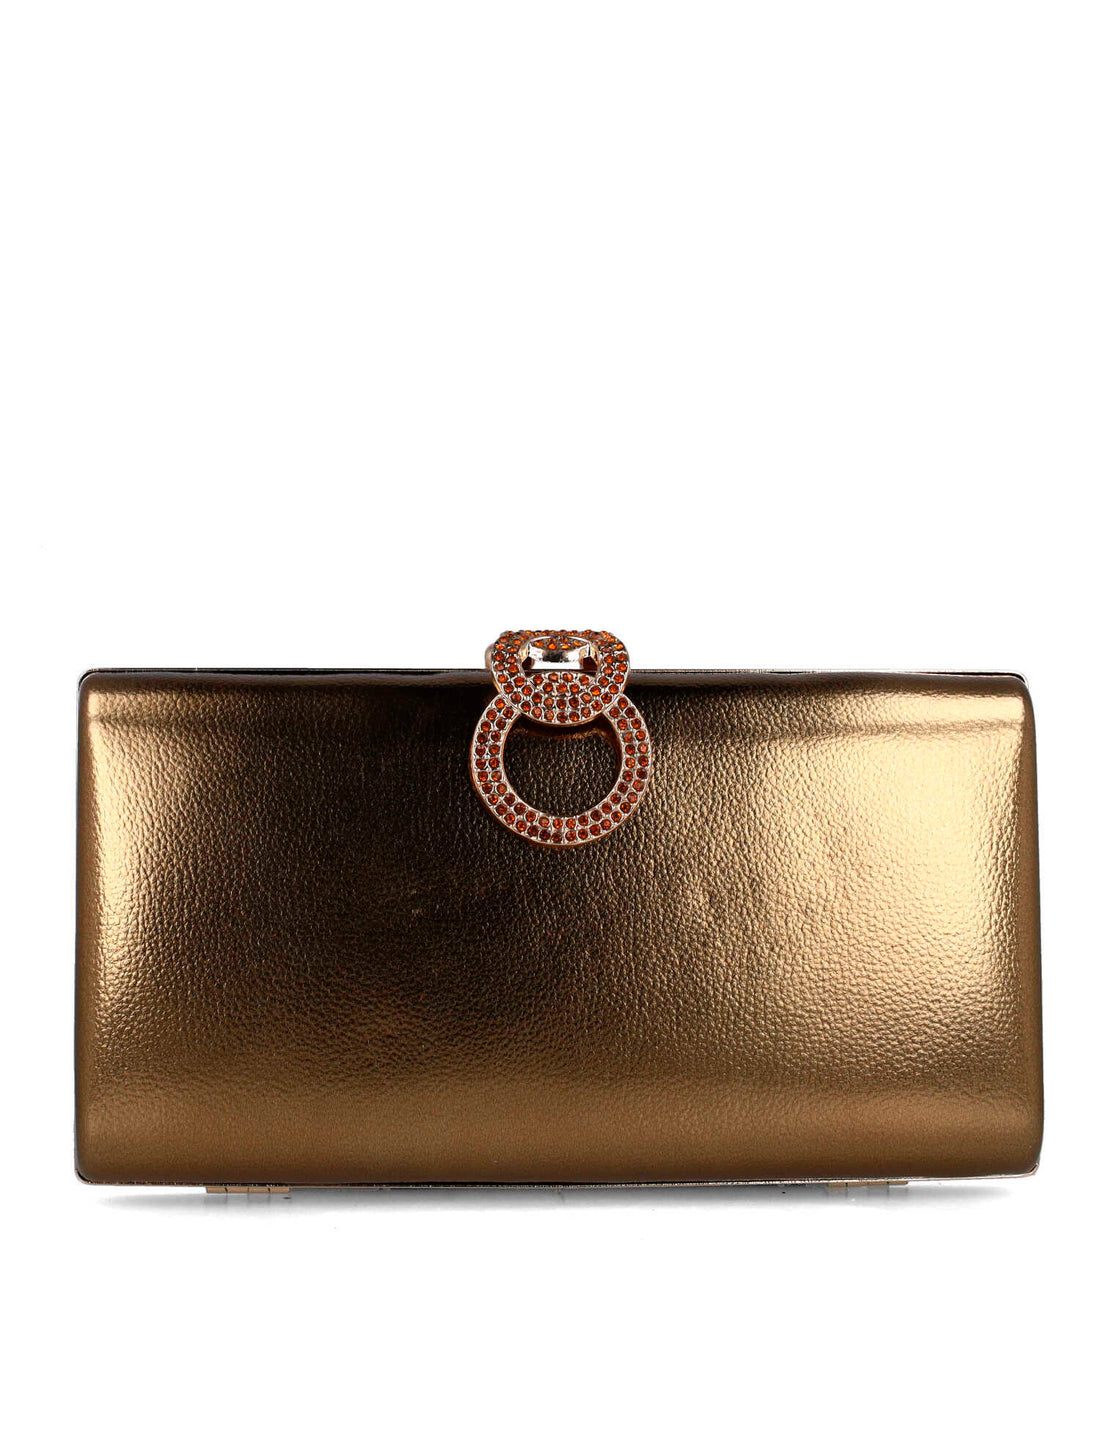 Brown Clutch Bag With Embellishment_85648_95_01